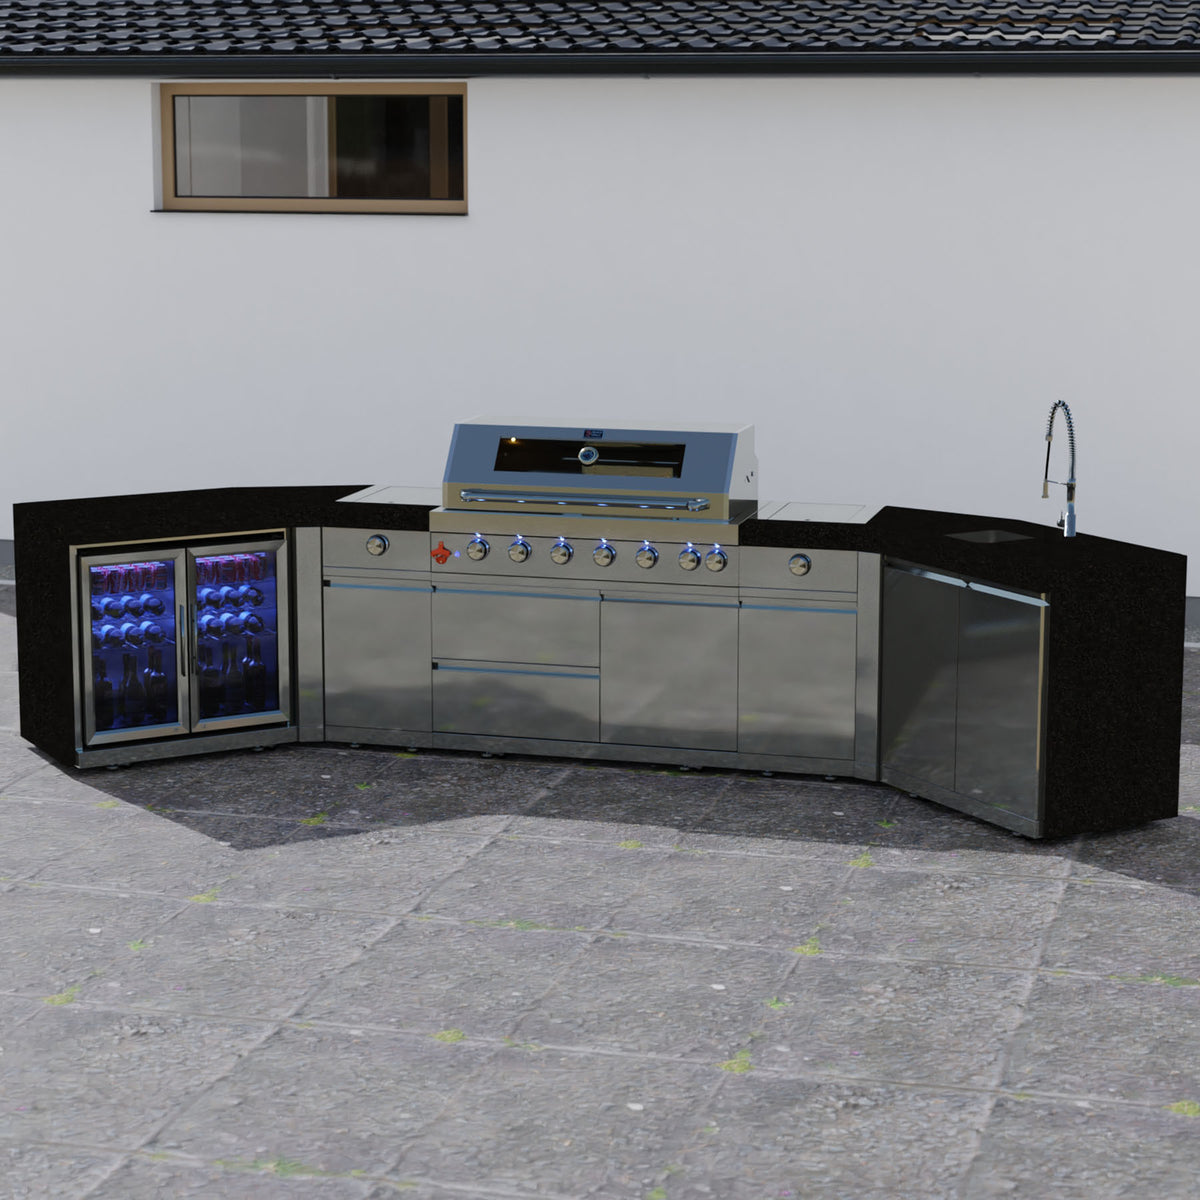 Draco Grills 6 Burner BBQ Modular Outdoor Kitchen with Searing Stations, Double Fridge and Sink